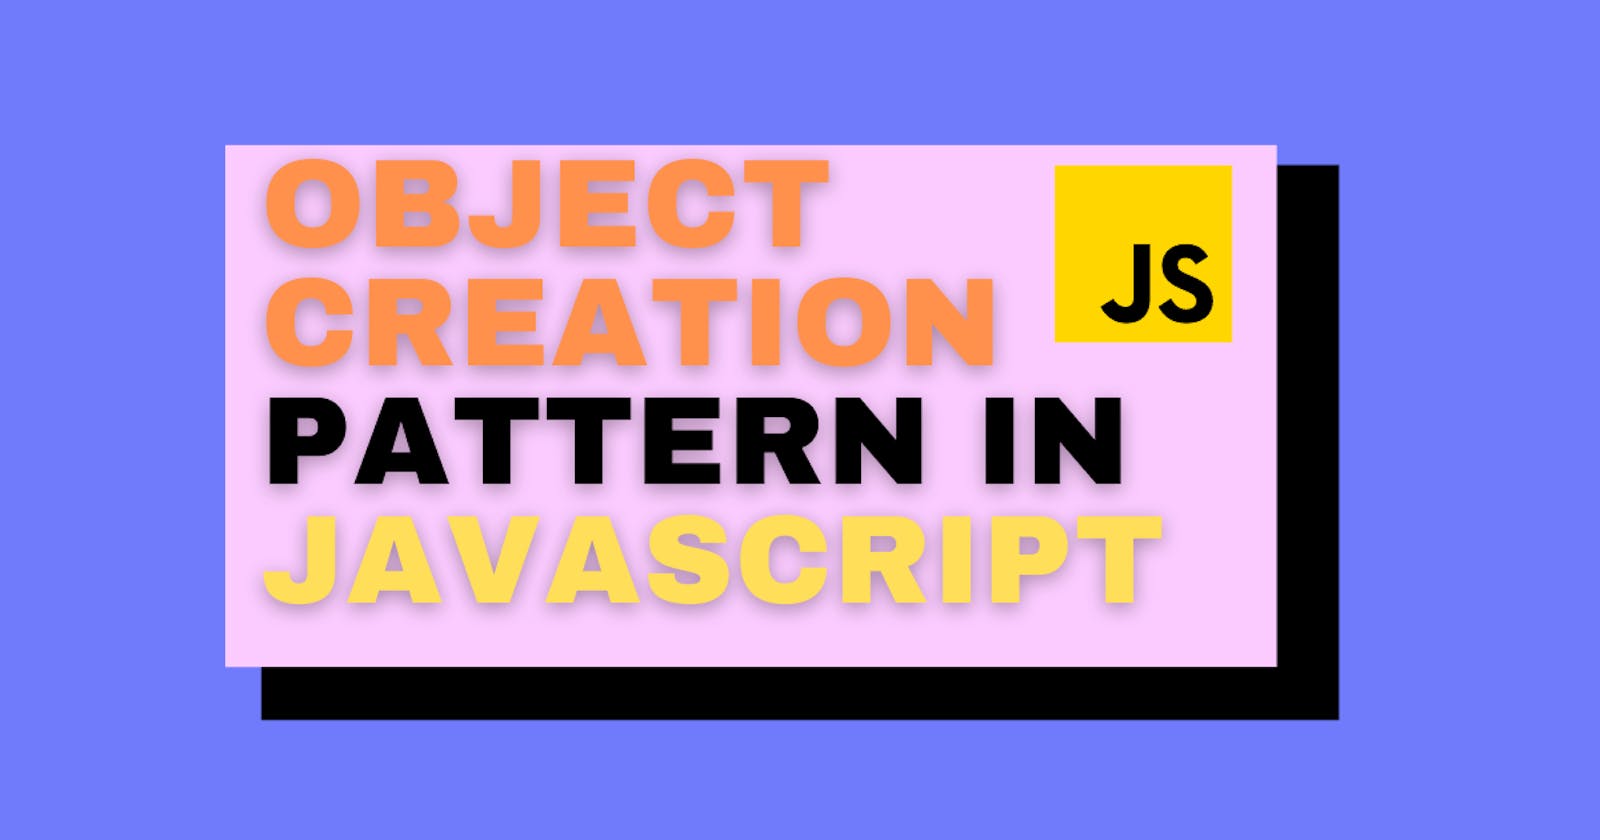 A short guide to Object creation pattern in JavaScript